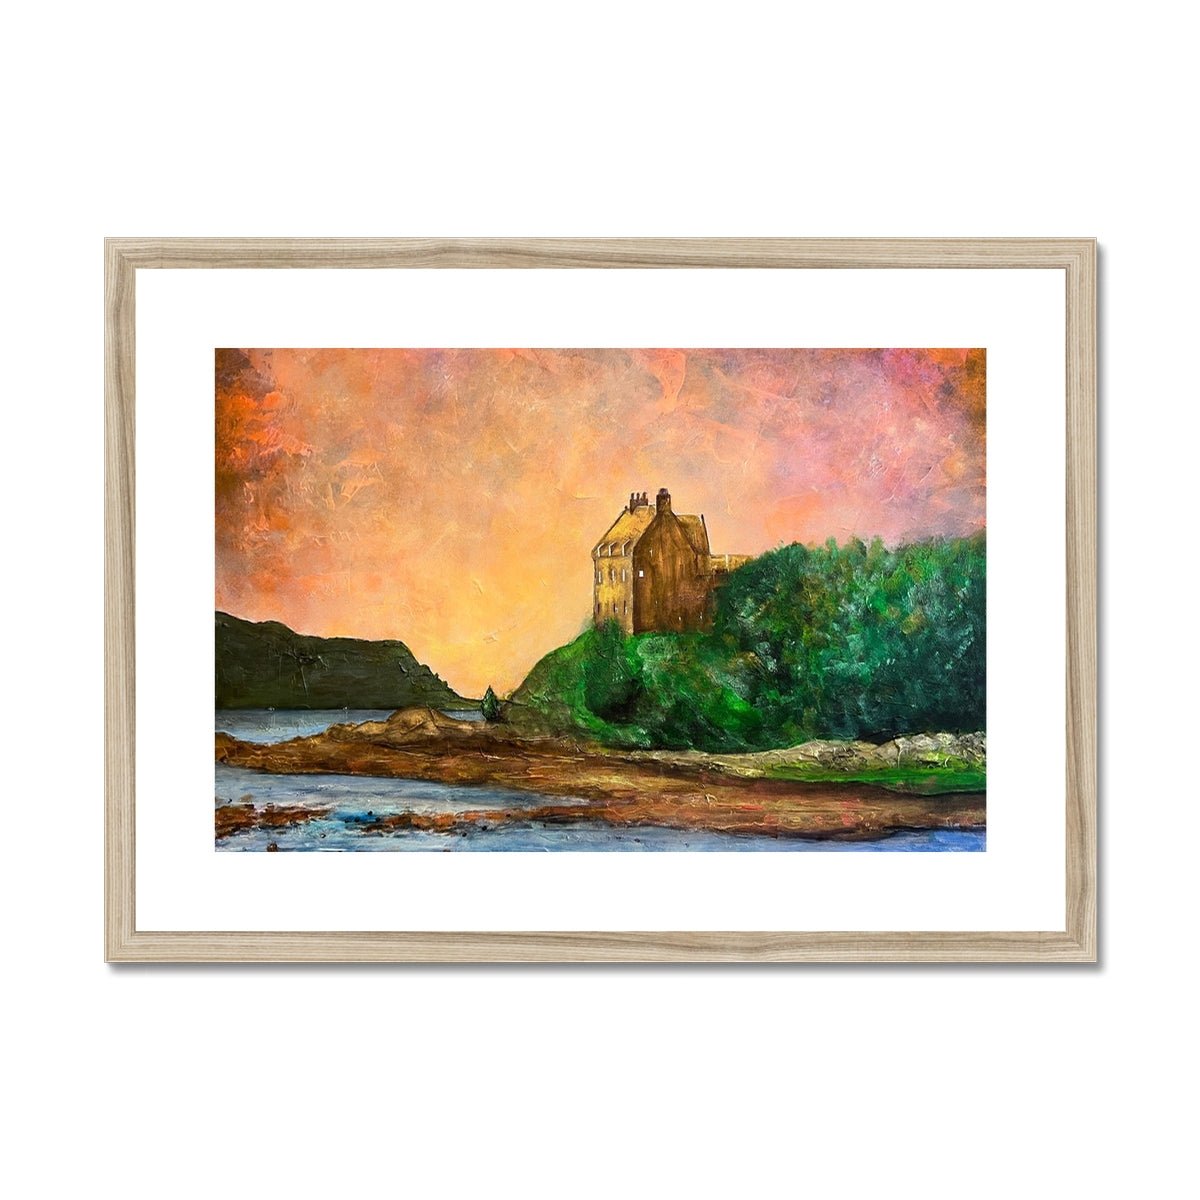 Duntrune Castle Painting | Framed & Mounted Prints From Scotland-Framed & Mounted Prints-Historic & Iconic Scotland Art Gallery-A2 Landscape-Natural Frame-Paintings, Prints, Homeware, Art Gifts From Scotland By Scottish Artist Kevin Hunter